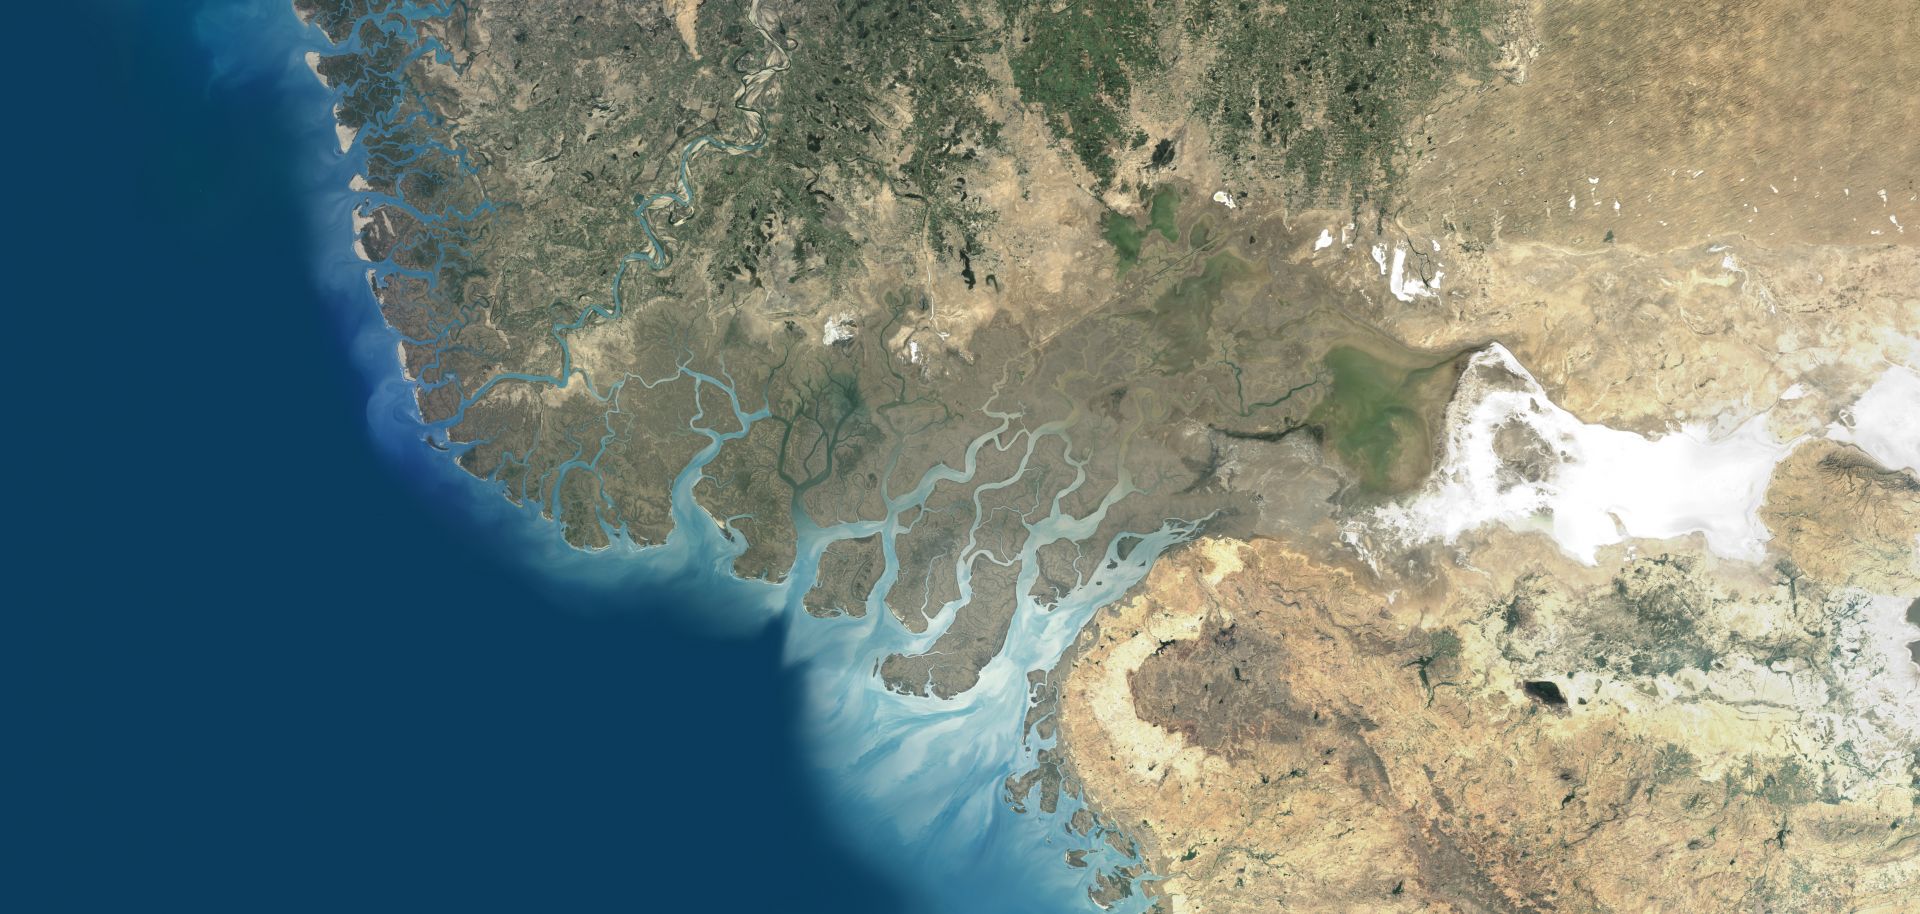 A composite satellite image of the Indus River Delta in Pakistan, where the Indus River flows into the Arabian Sea.